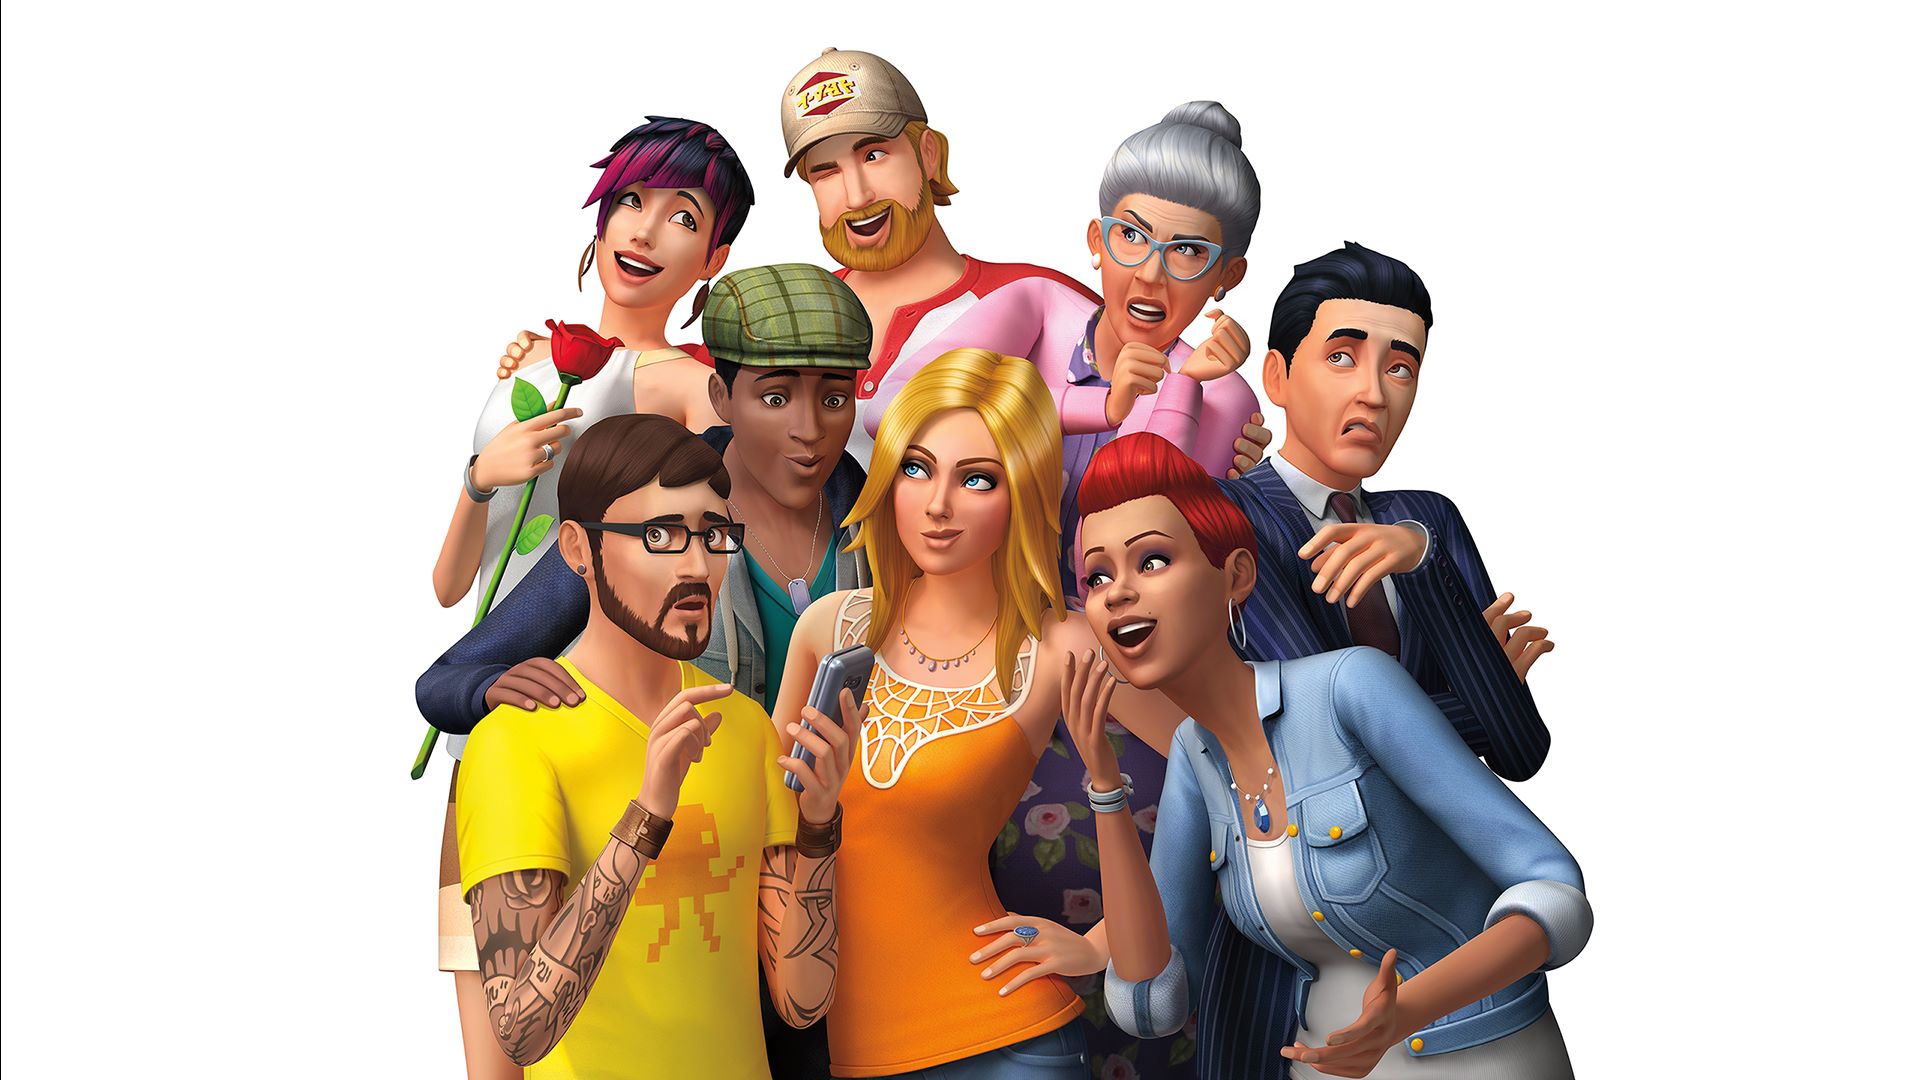 Sims 4 City Living Download Torrent